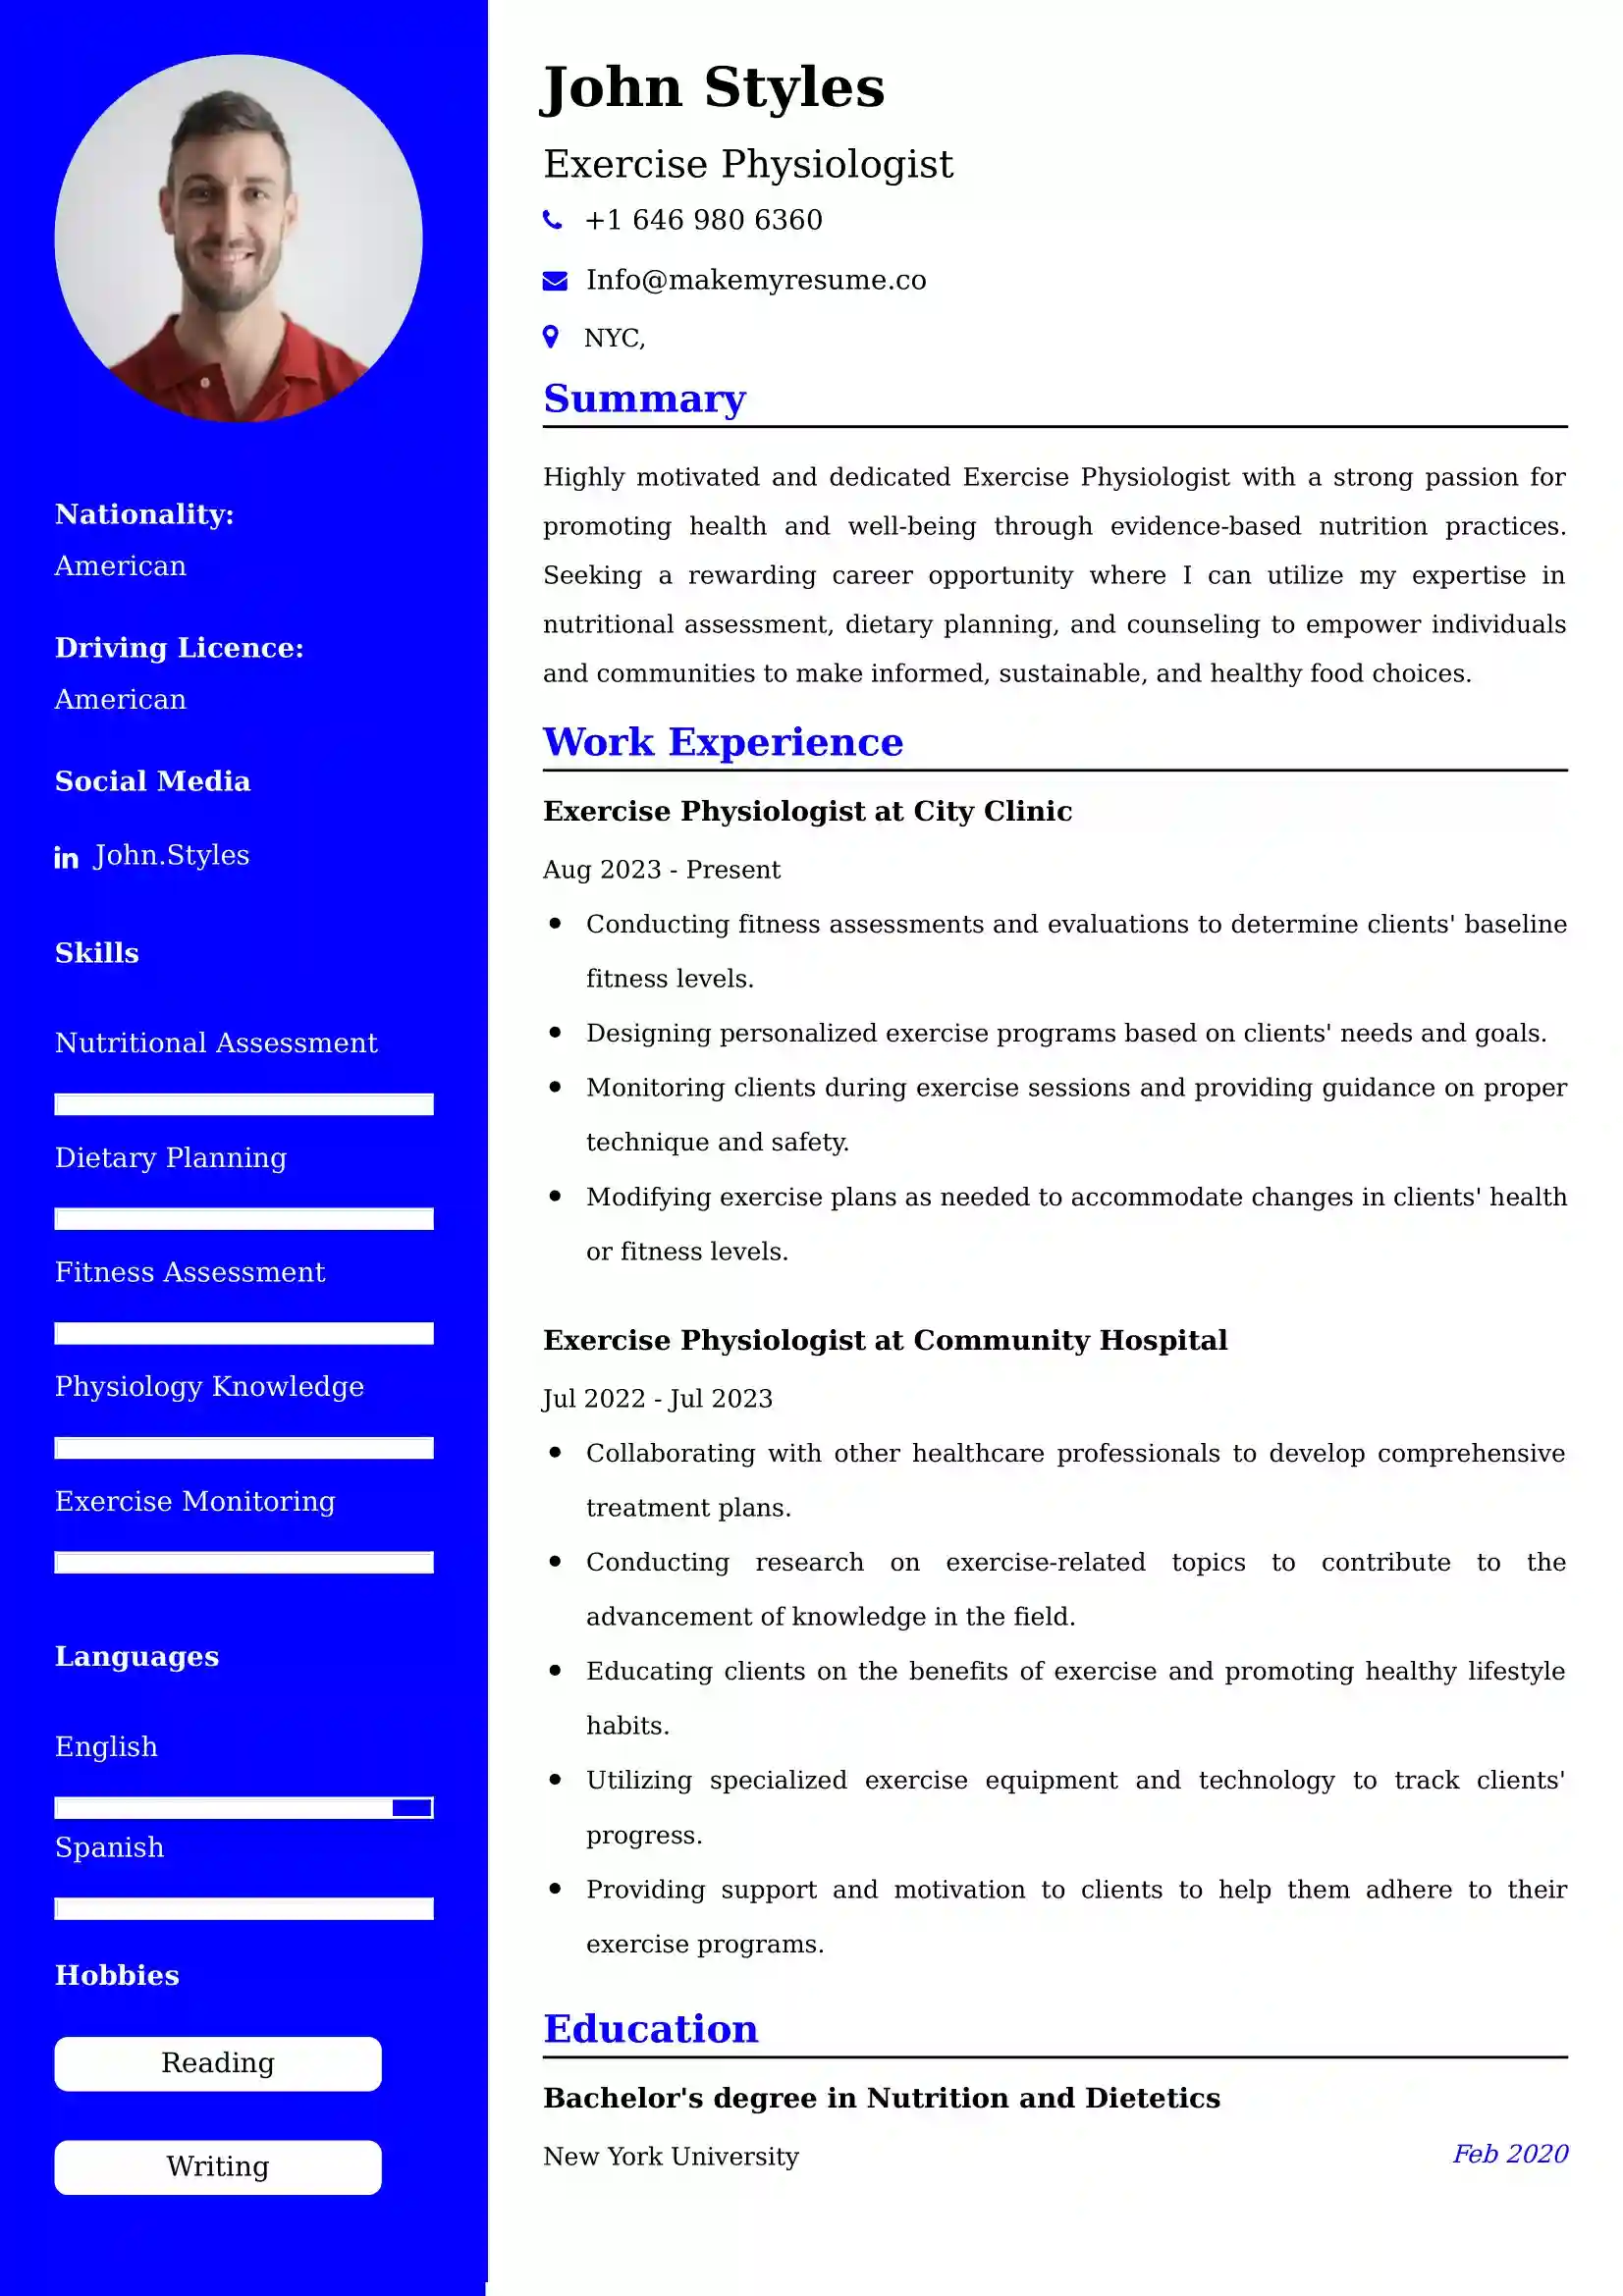 Exercise Physiologist Resume Examples - Brazilian Format, Latest Template